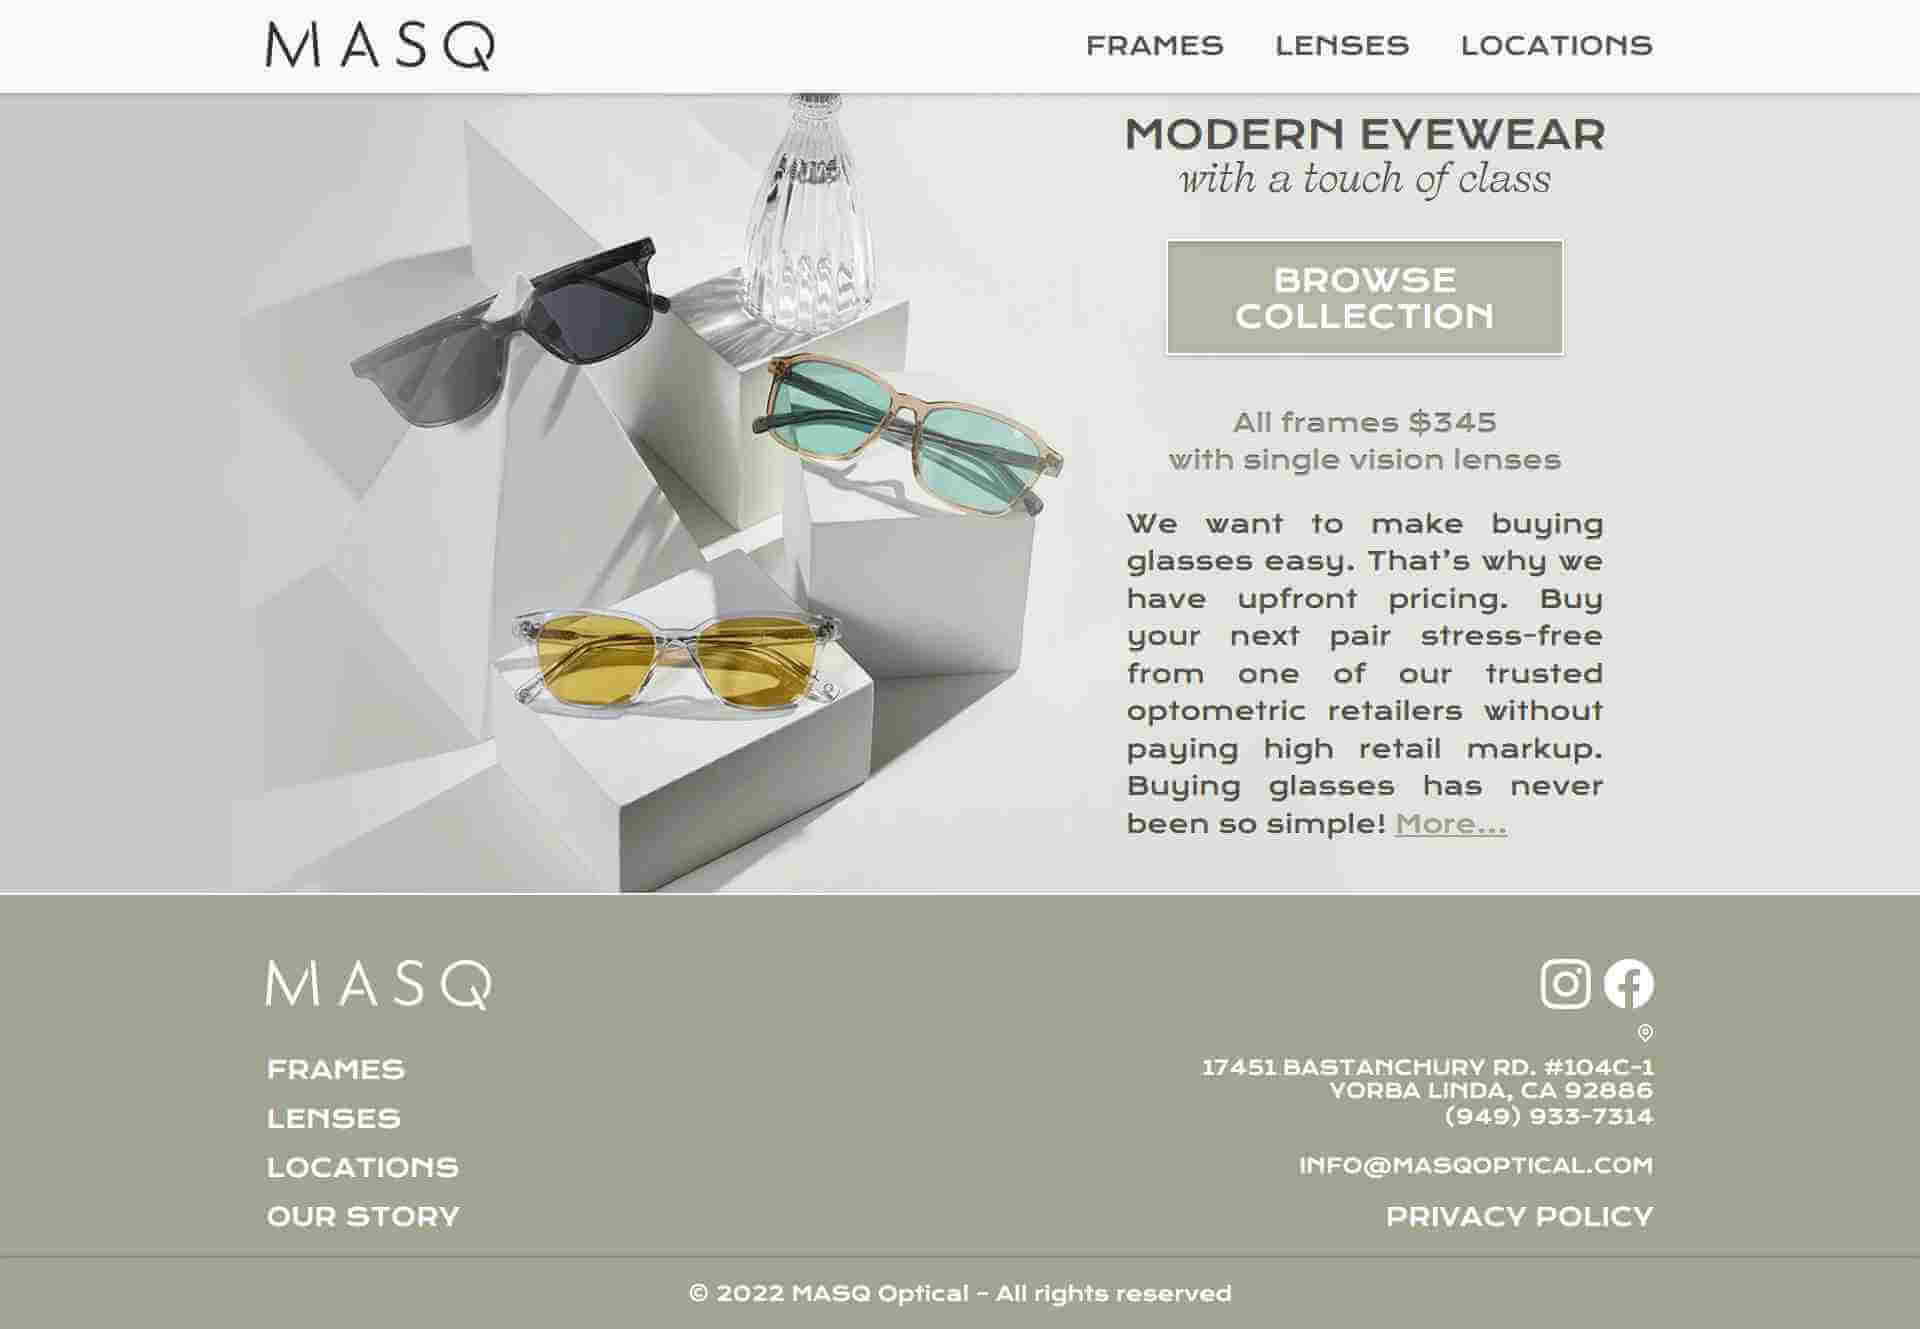 MASQ-Optical-–-Modern-Eyewear-With-a-Touch-of-Class-min-compressed